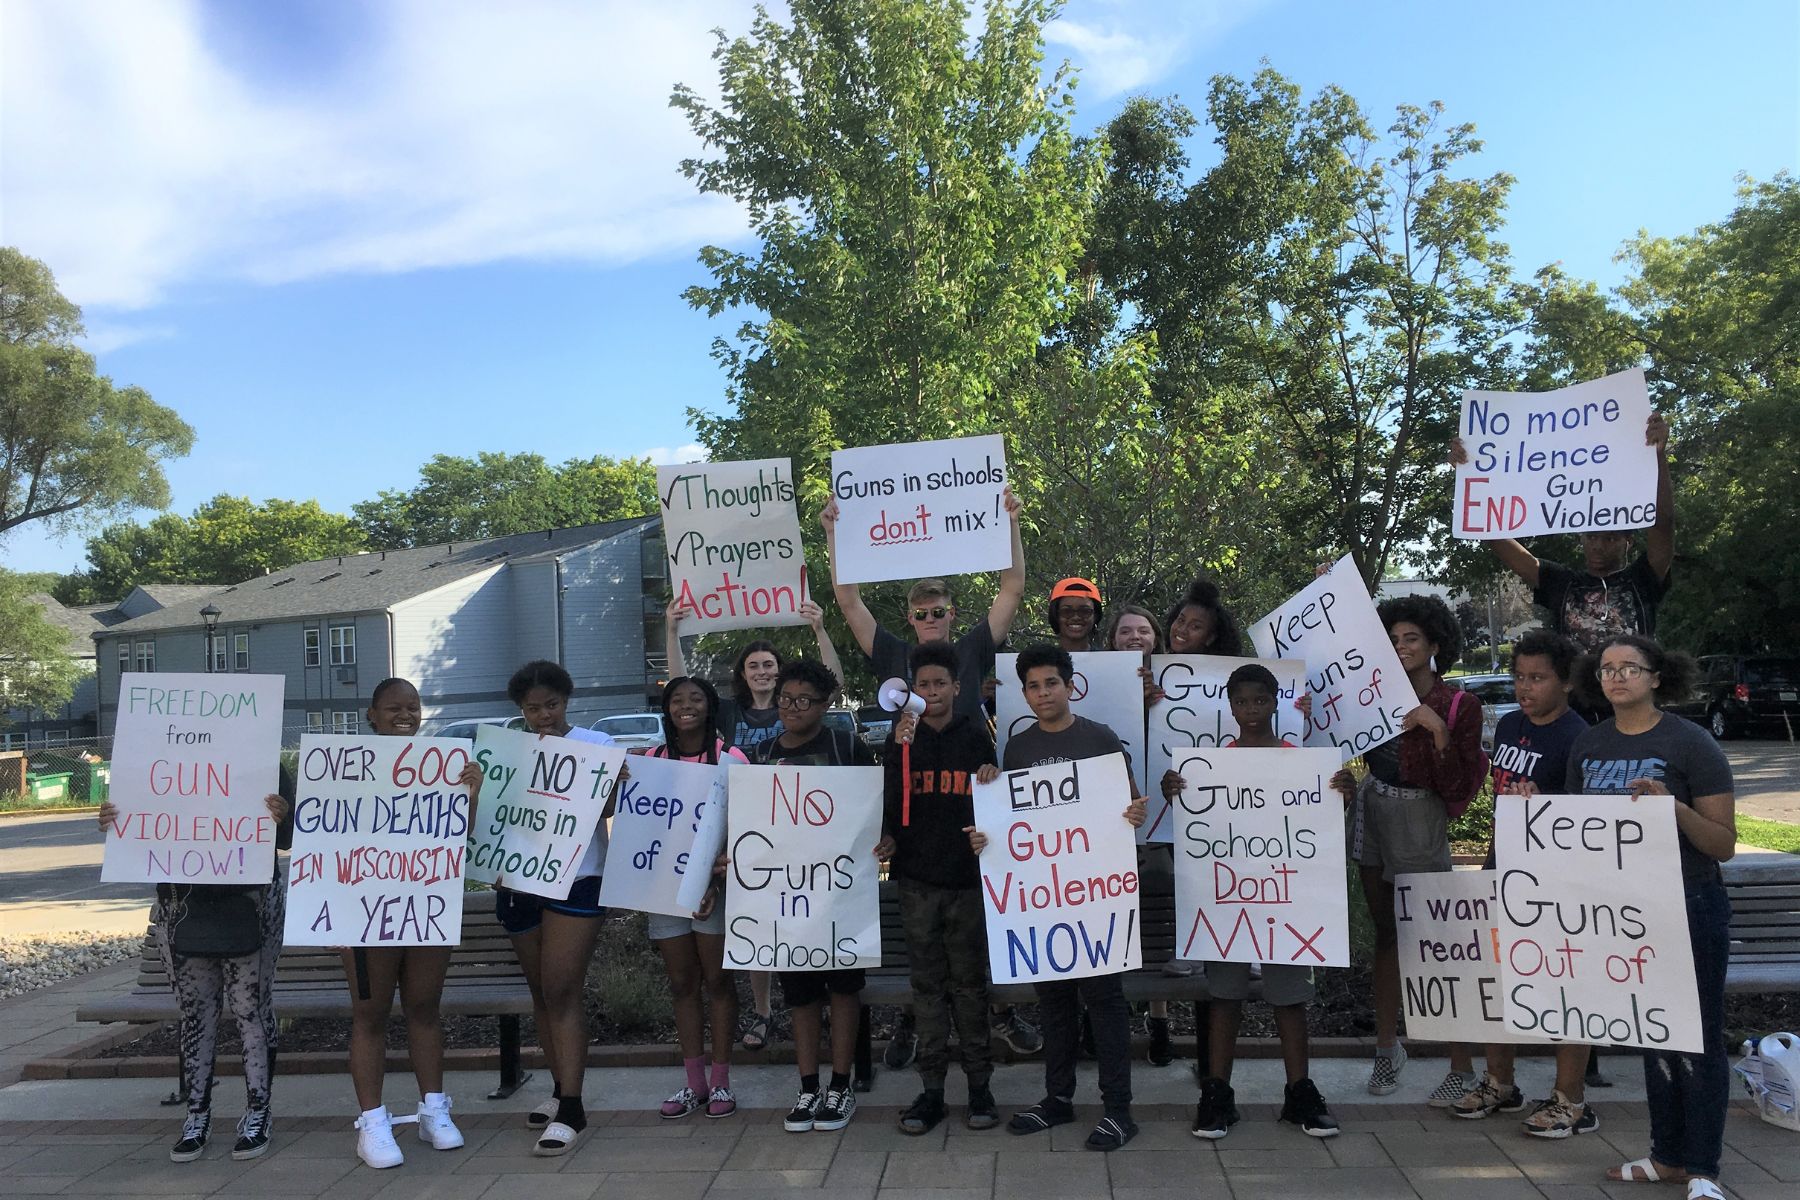 A group of youth hold signs that express passion for ending gun violence